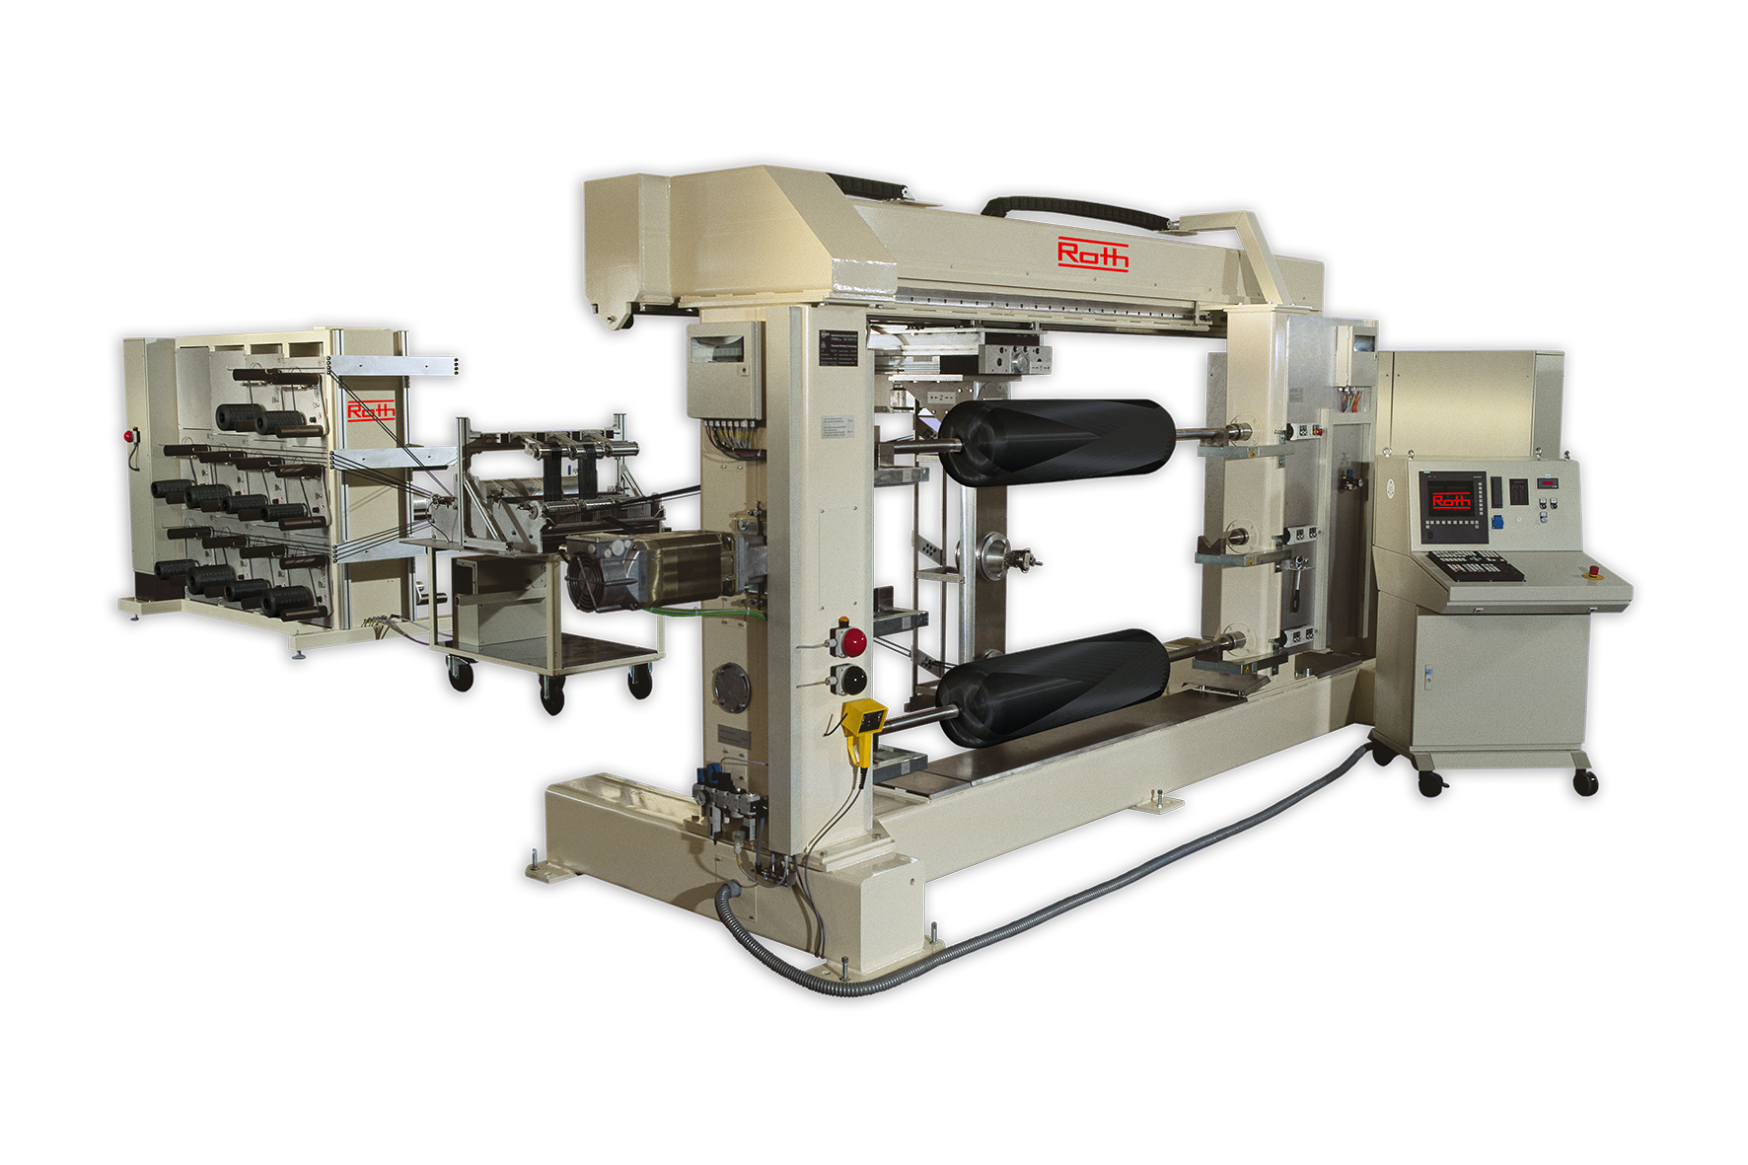 Roth’s filament winding machine. (Photo courtesy Roth Composite Machinery.)